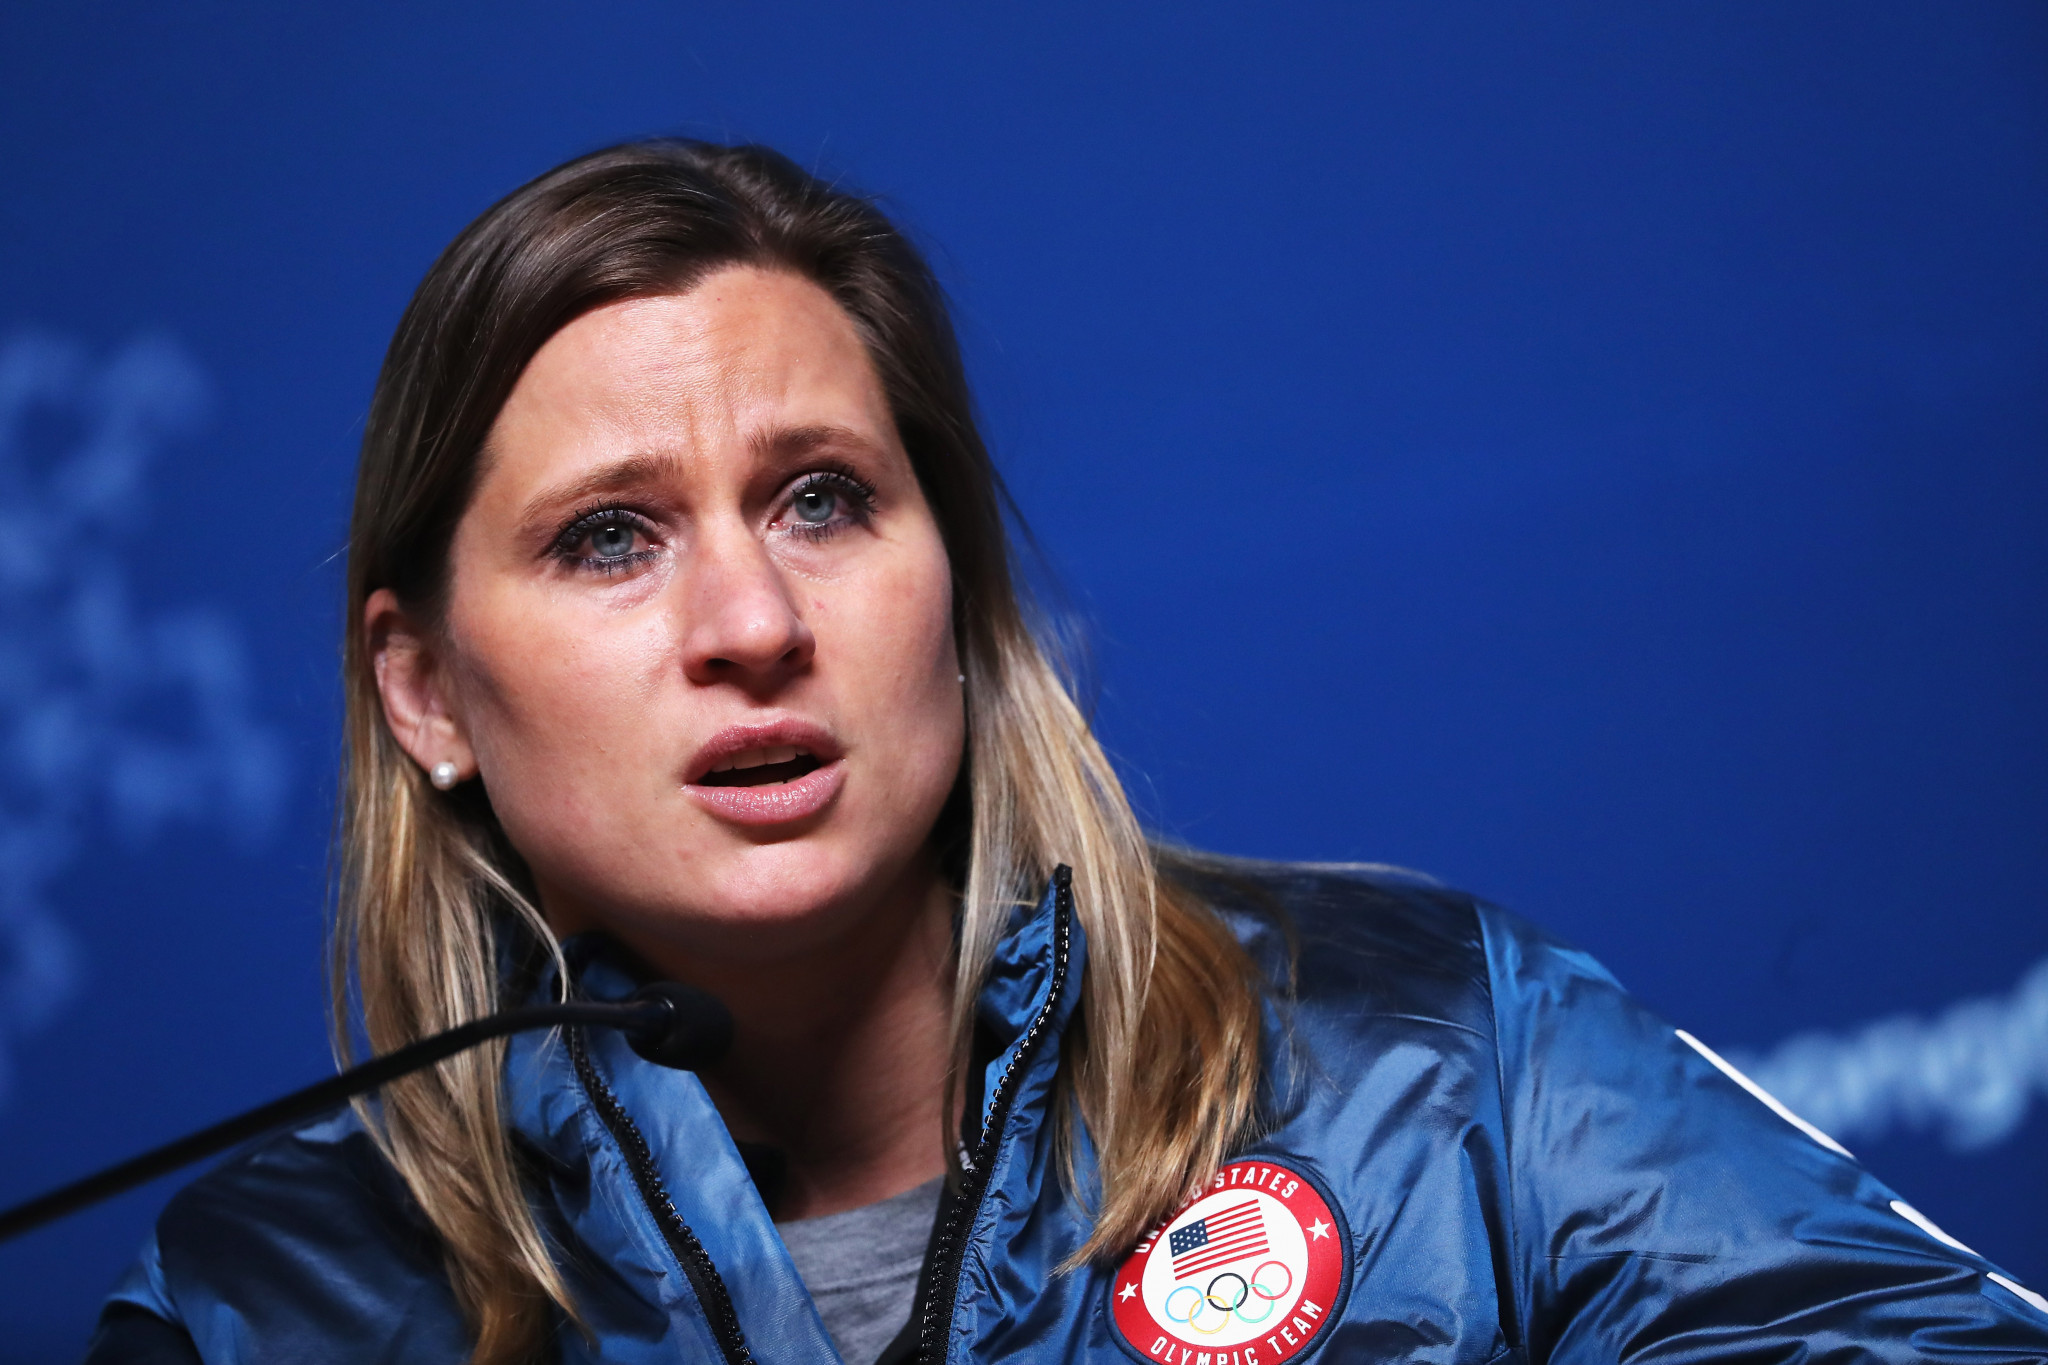 Lawsuit accuses Ruggiero and USOC of preventing efforts to investigate sexual abuse